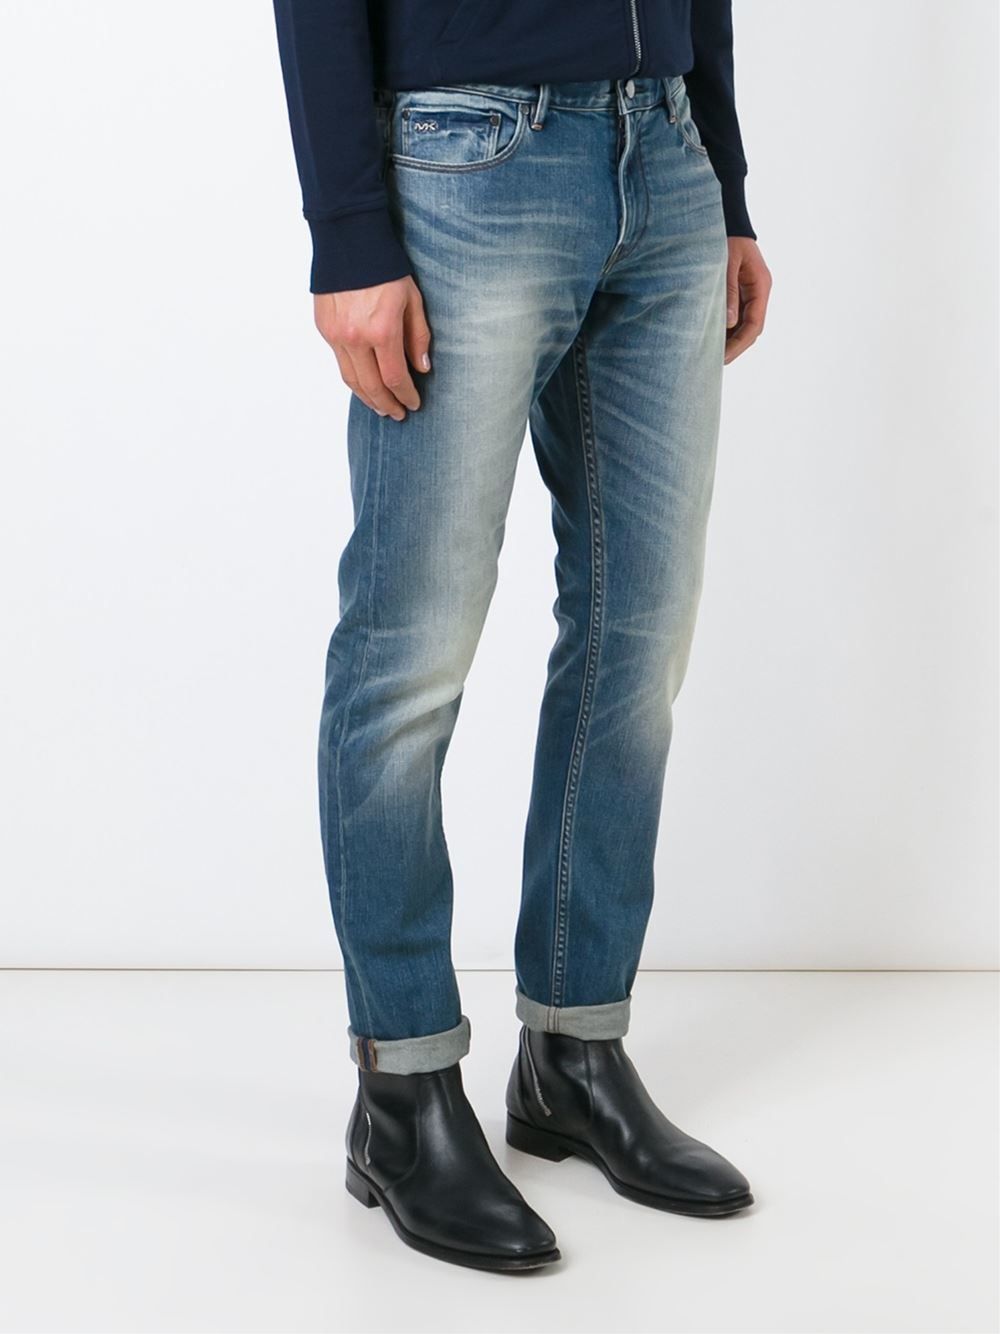 Michael Kors Stone Washed Jeans in Blue for Men - Lyst